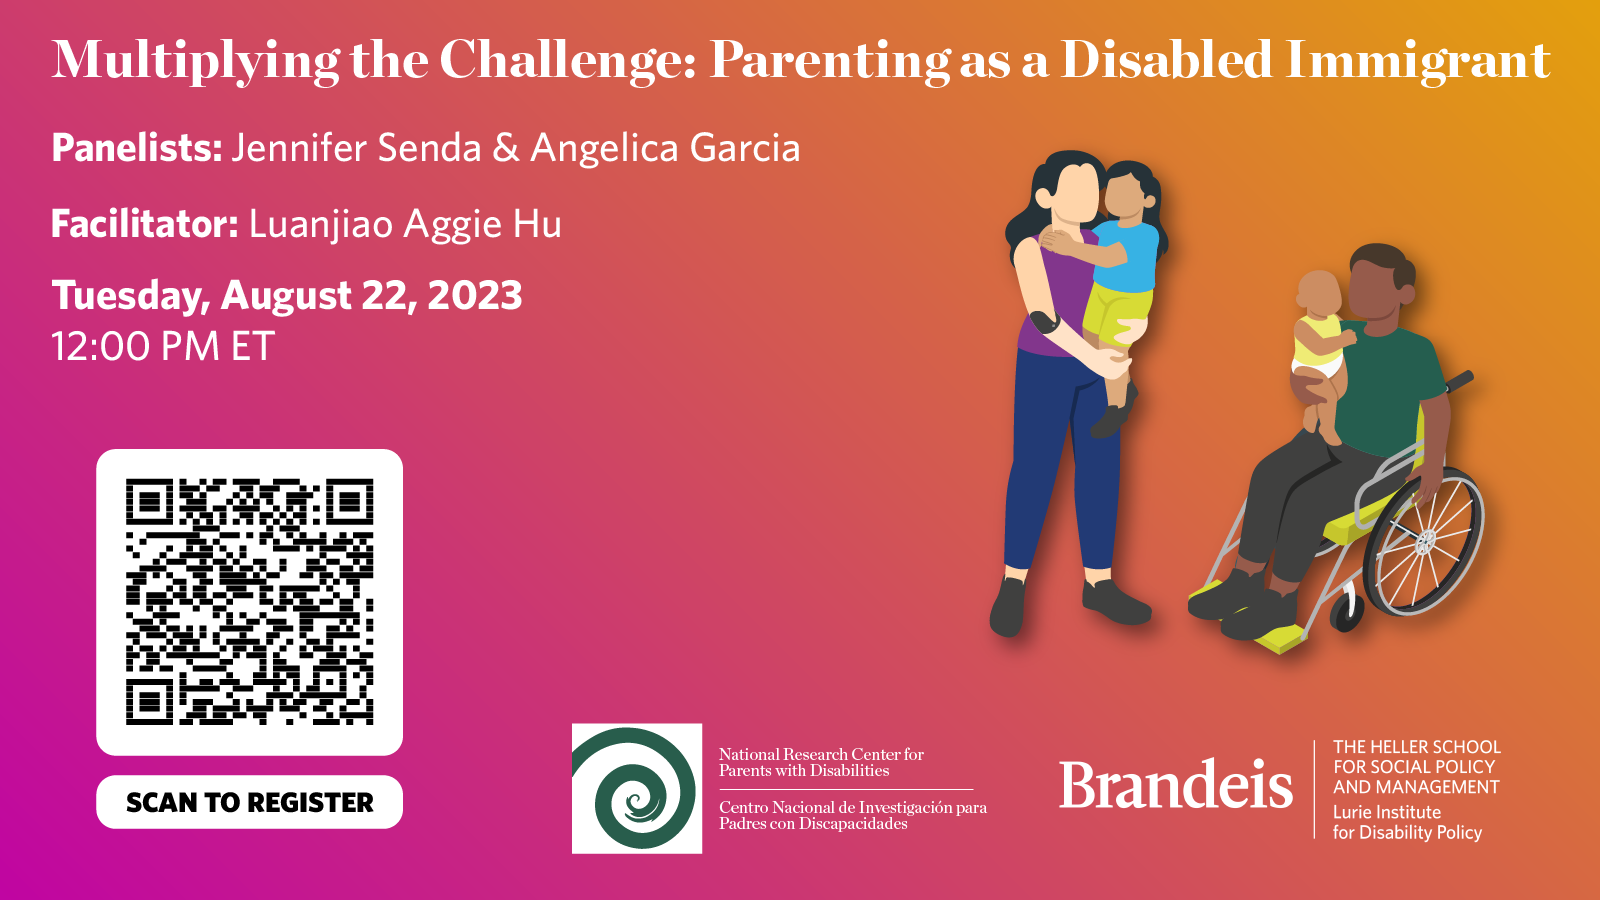  Multiplying the Challenge: Parenting as a Disabled Immigrant. Panelists: Jennifer Senda & Angelica Garcia. Facilitator: Luanjiao Aggie Hu. Tuesday, August 22, 2023. 12:00 PM ET. National Research Center for Parents with Disabilities. Brandeis, The Heller School for Social Policy and Management, Lurie Institute for Disability Policy.